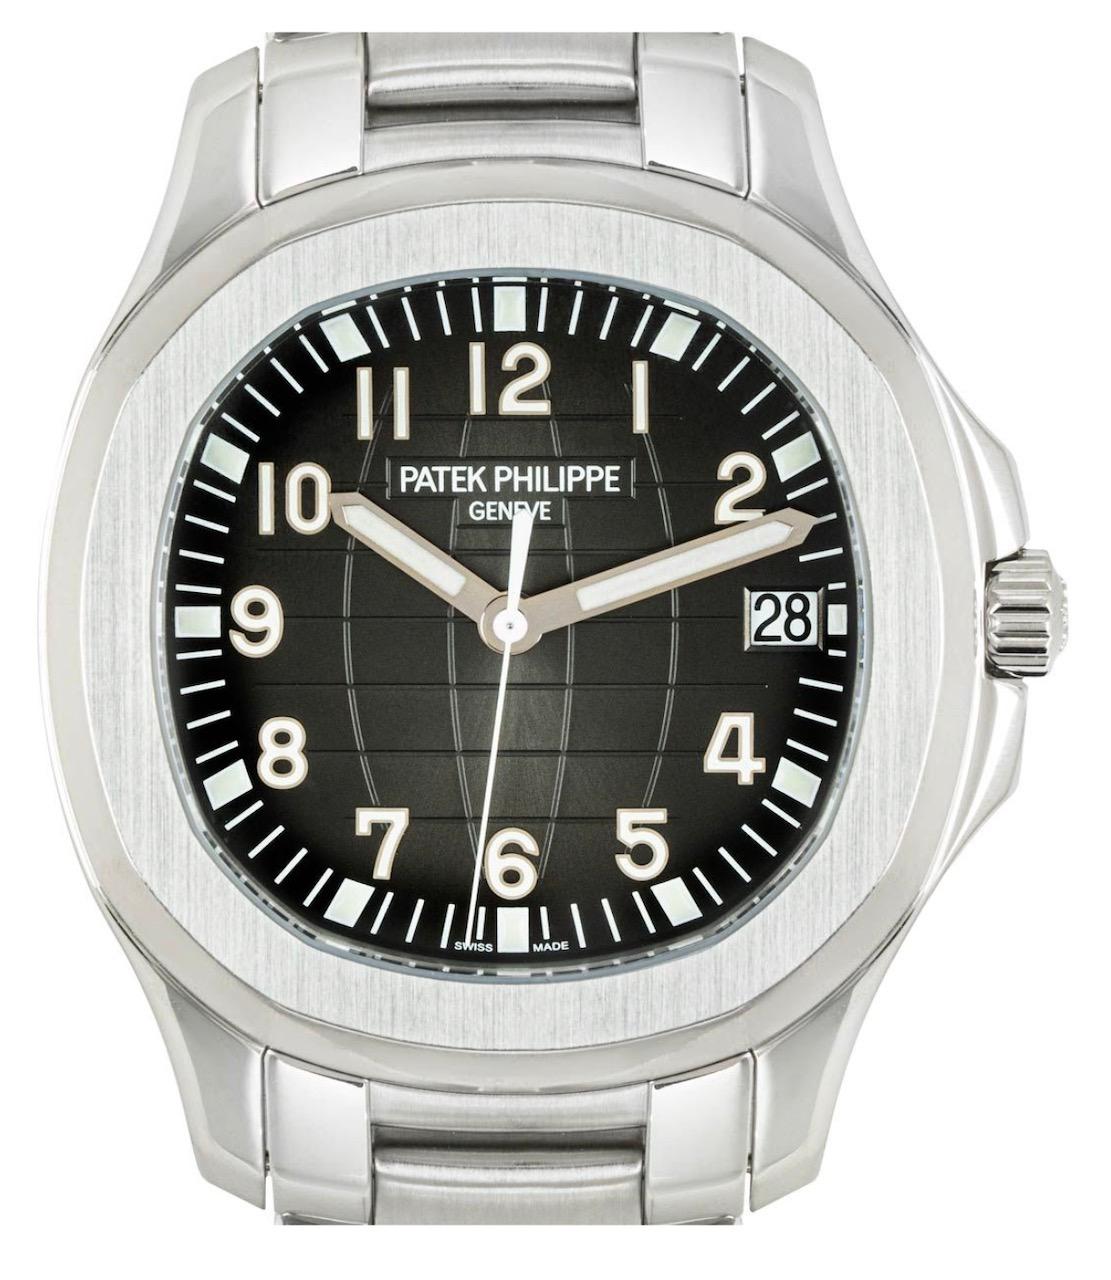 A stainless steel Aquanaut from Patek Philippe. Features a black embossed dial with a date aperture and a rounded octagon case which was inspired by the Nautilus.

The stainless steel bracelet is equipped with a concealed Aquanaut double fold-over